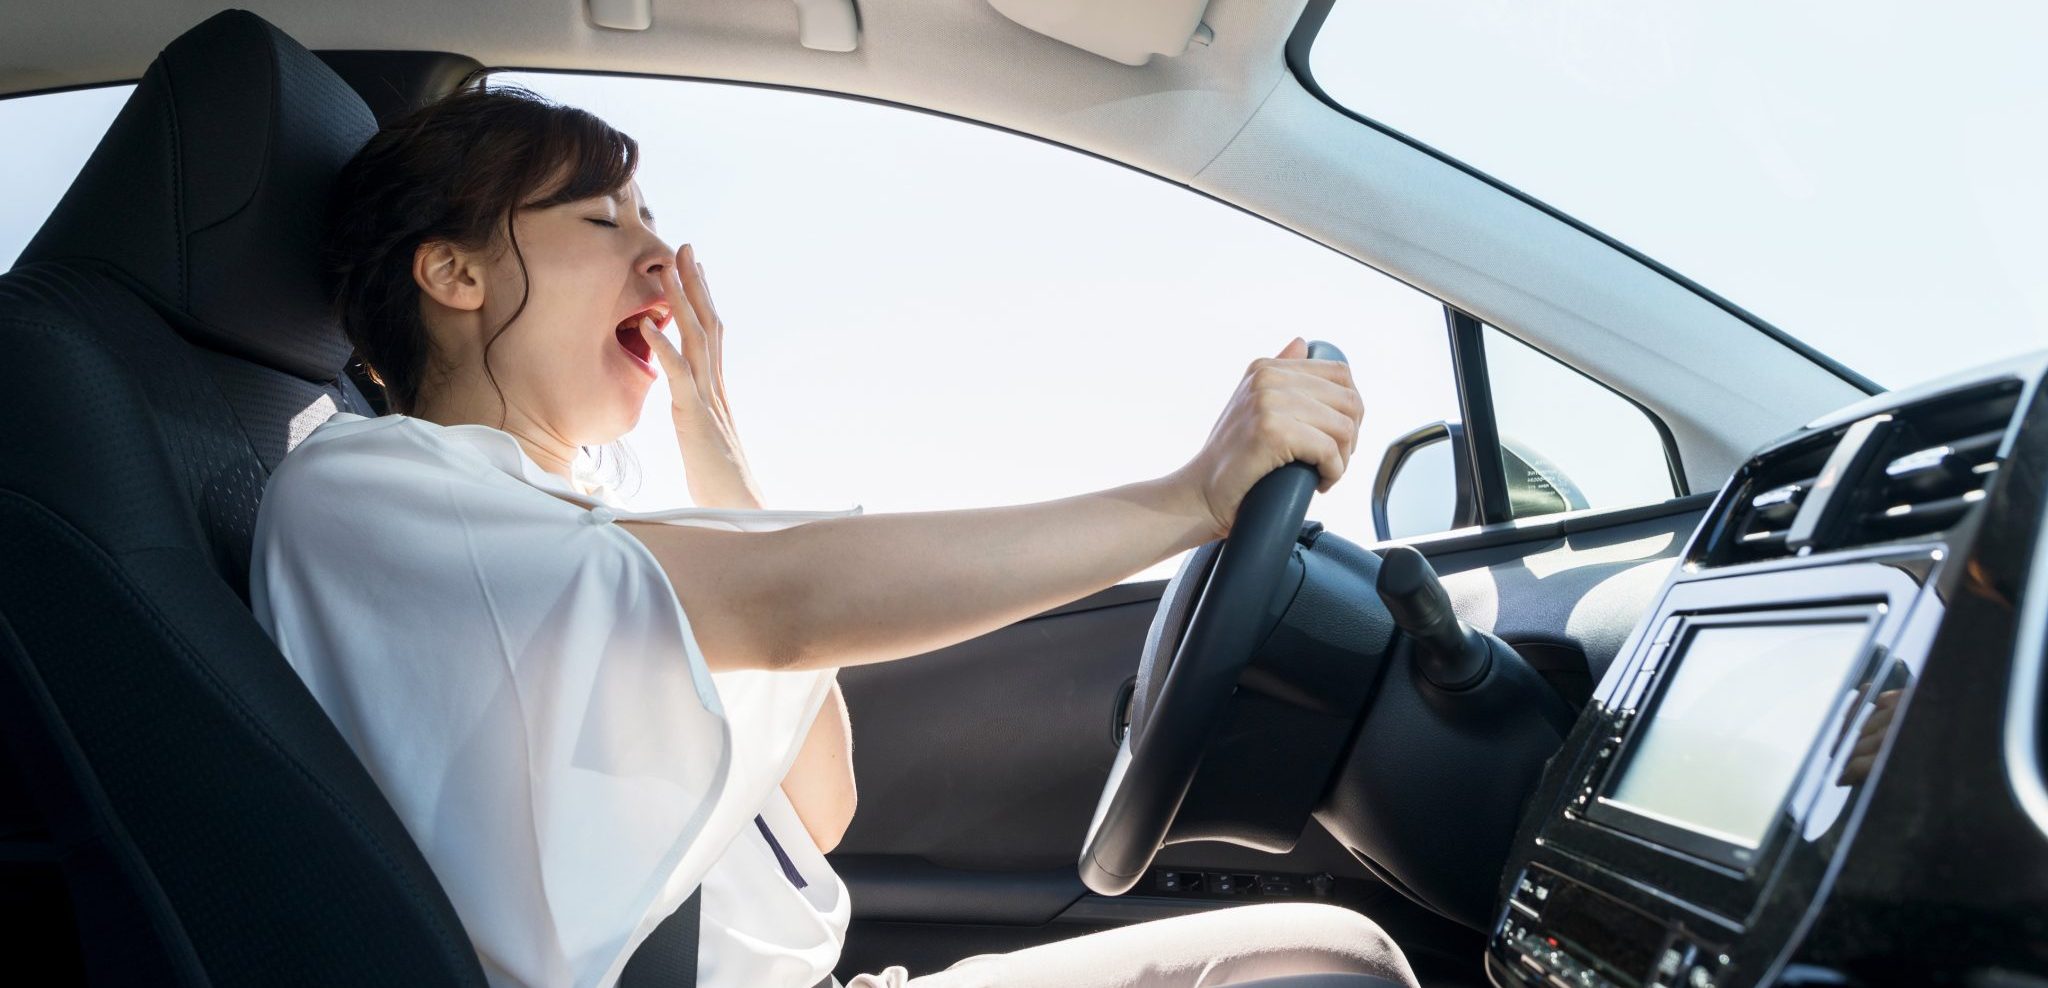 Attention: How to Avoid Falling Asleep While Driving